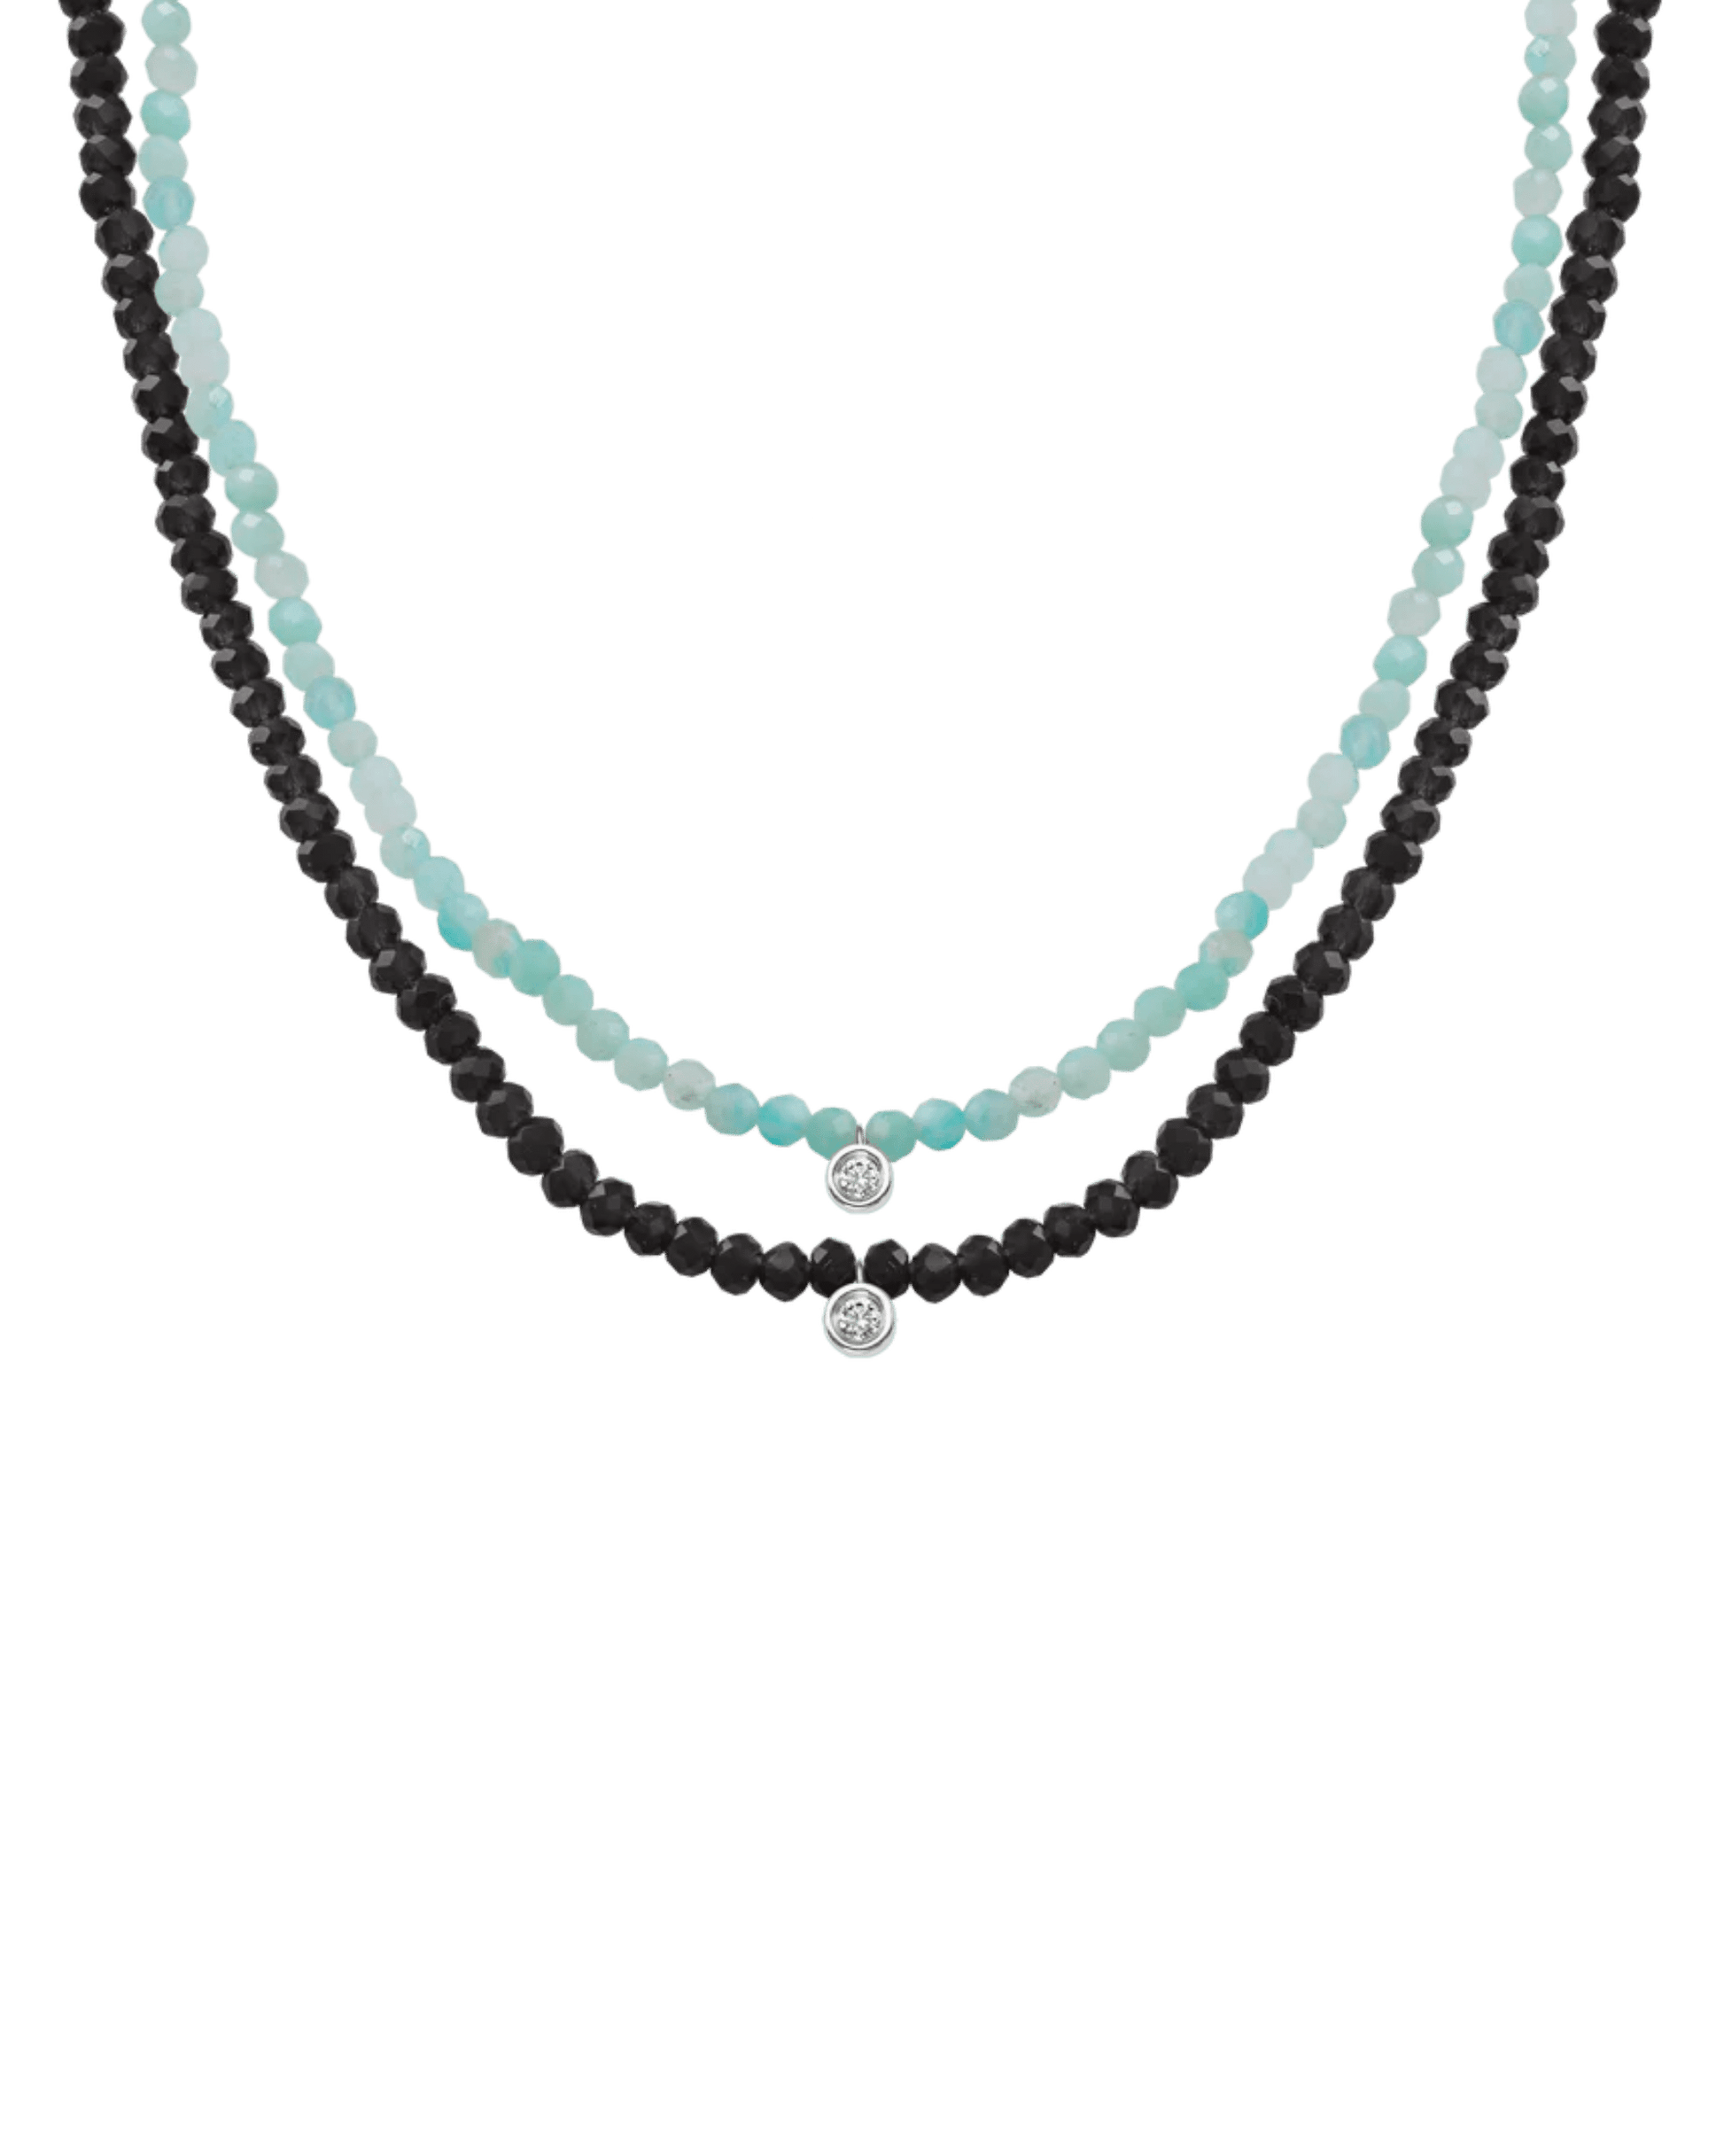 Set of Gemstone & Diamond Necklaces - 14K White Gold Necklaces magal-dev Glass Beads Black Spinnel Small 0.03ct 